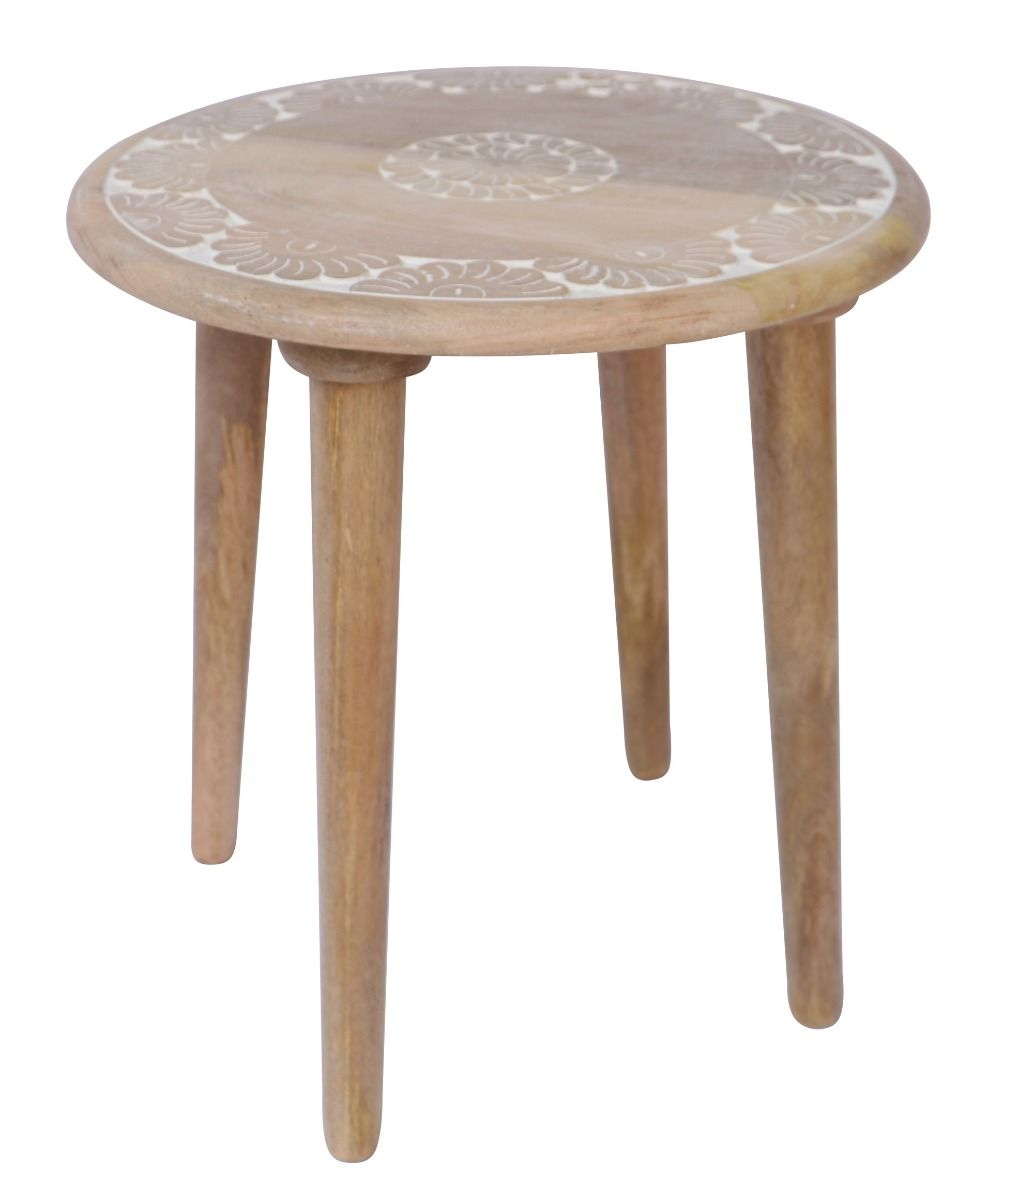 Wood table white distressed 44.5 x48 cm